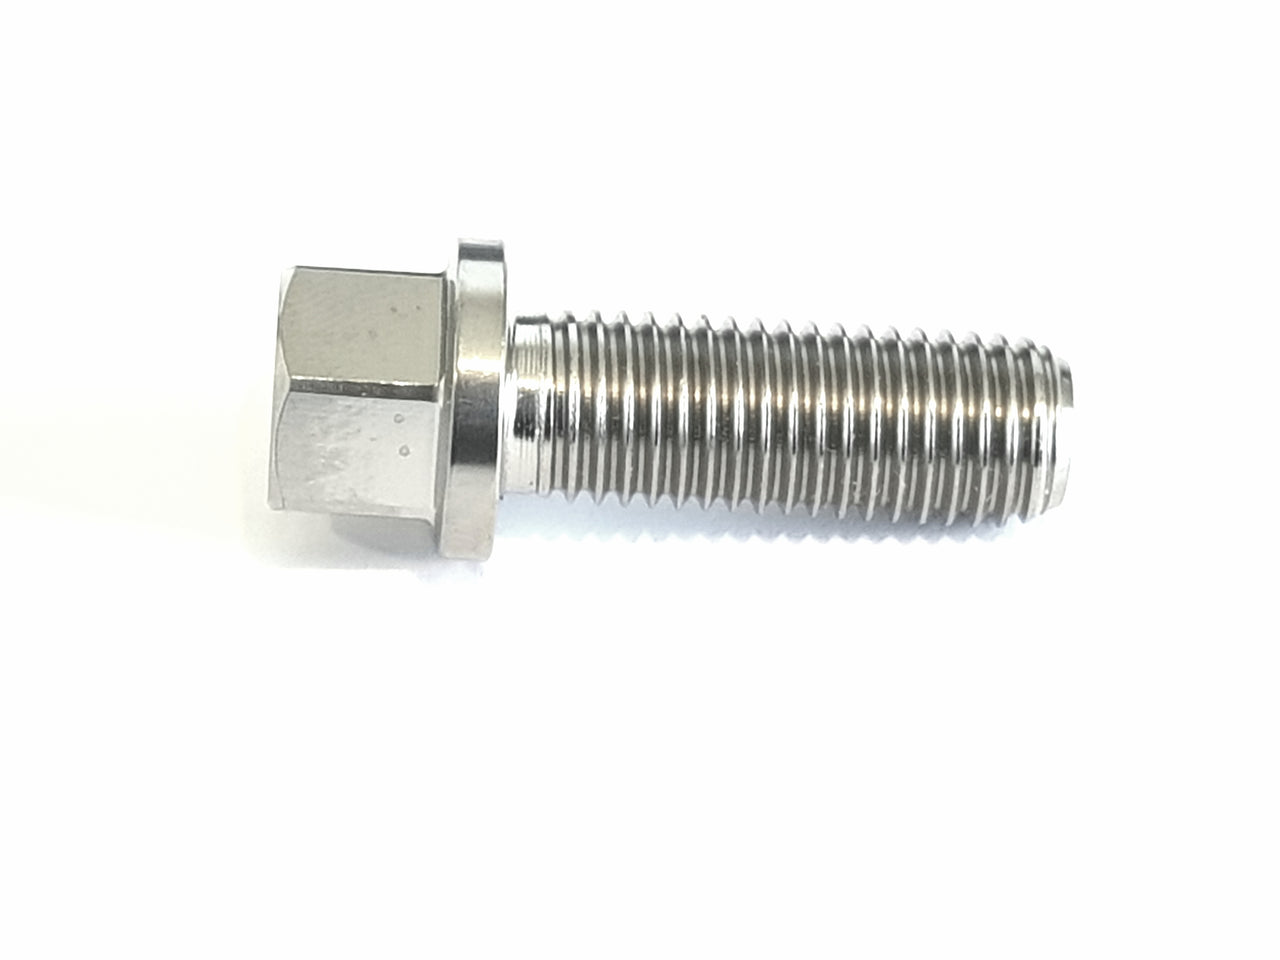 5/16 unf .875" reduced hex bolt